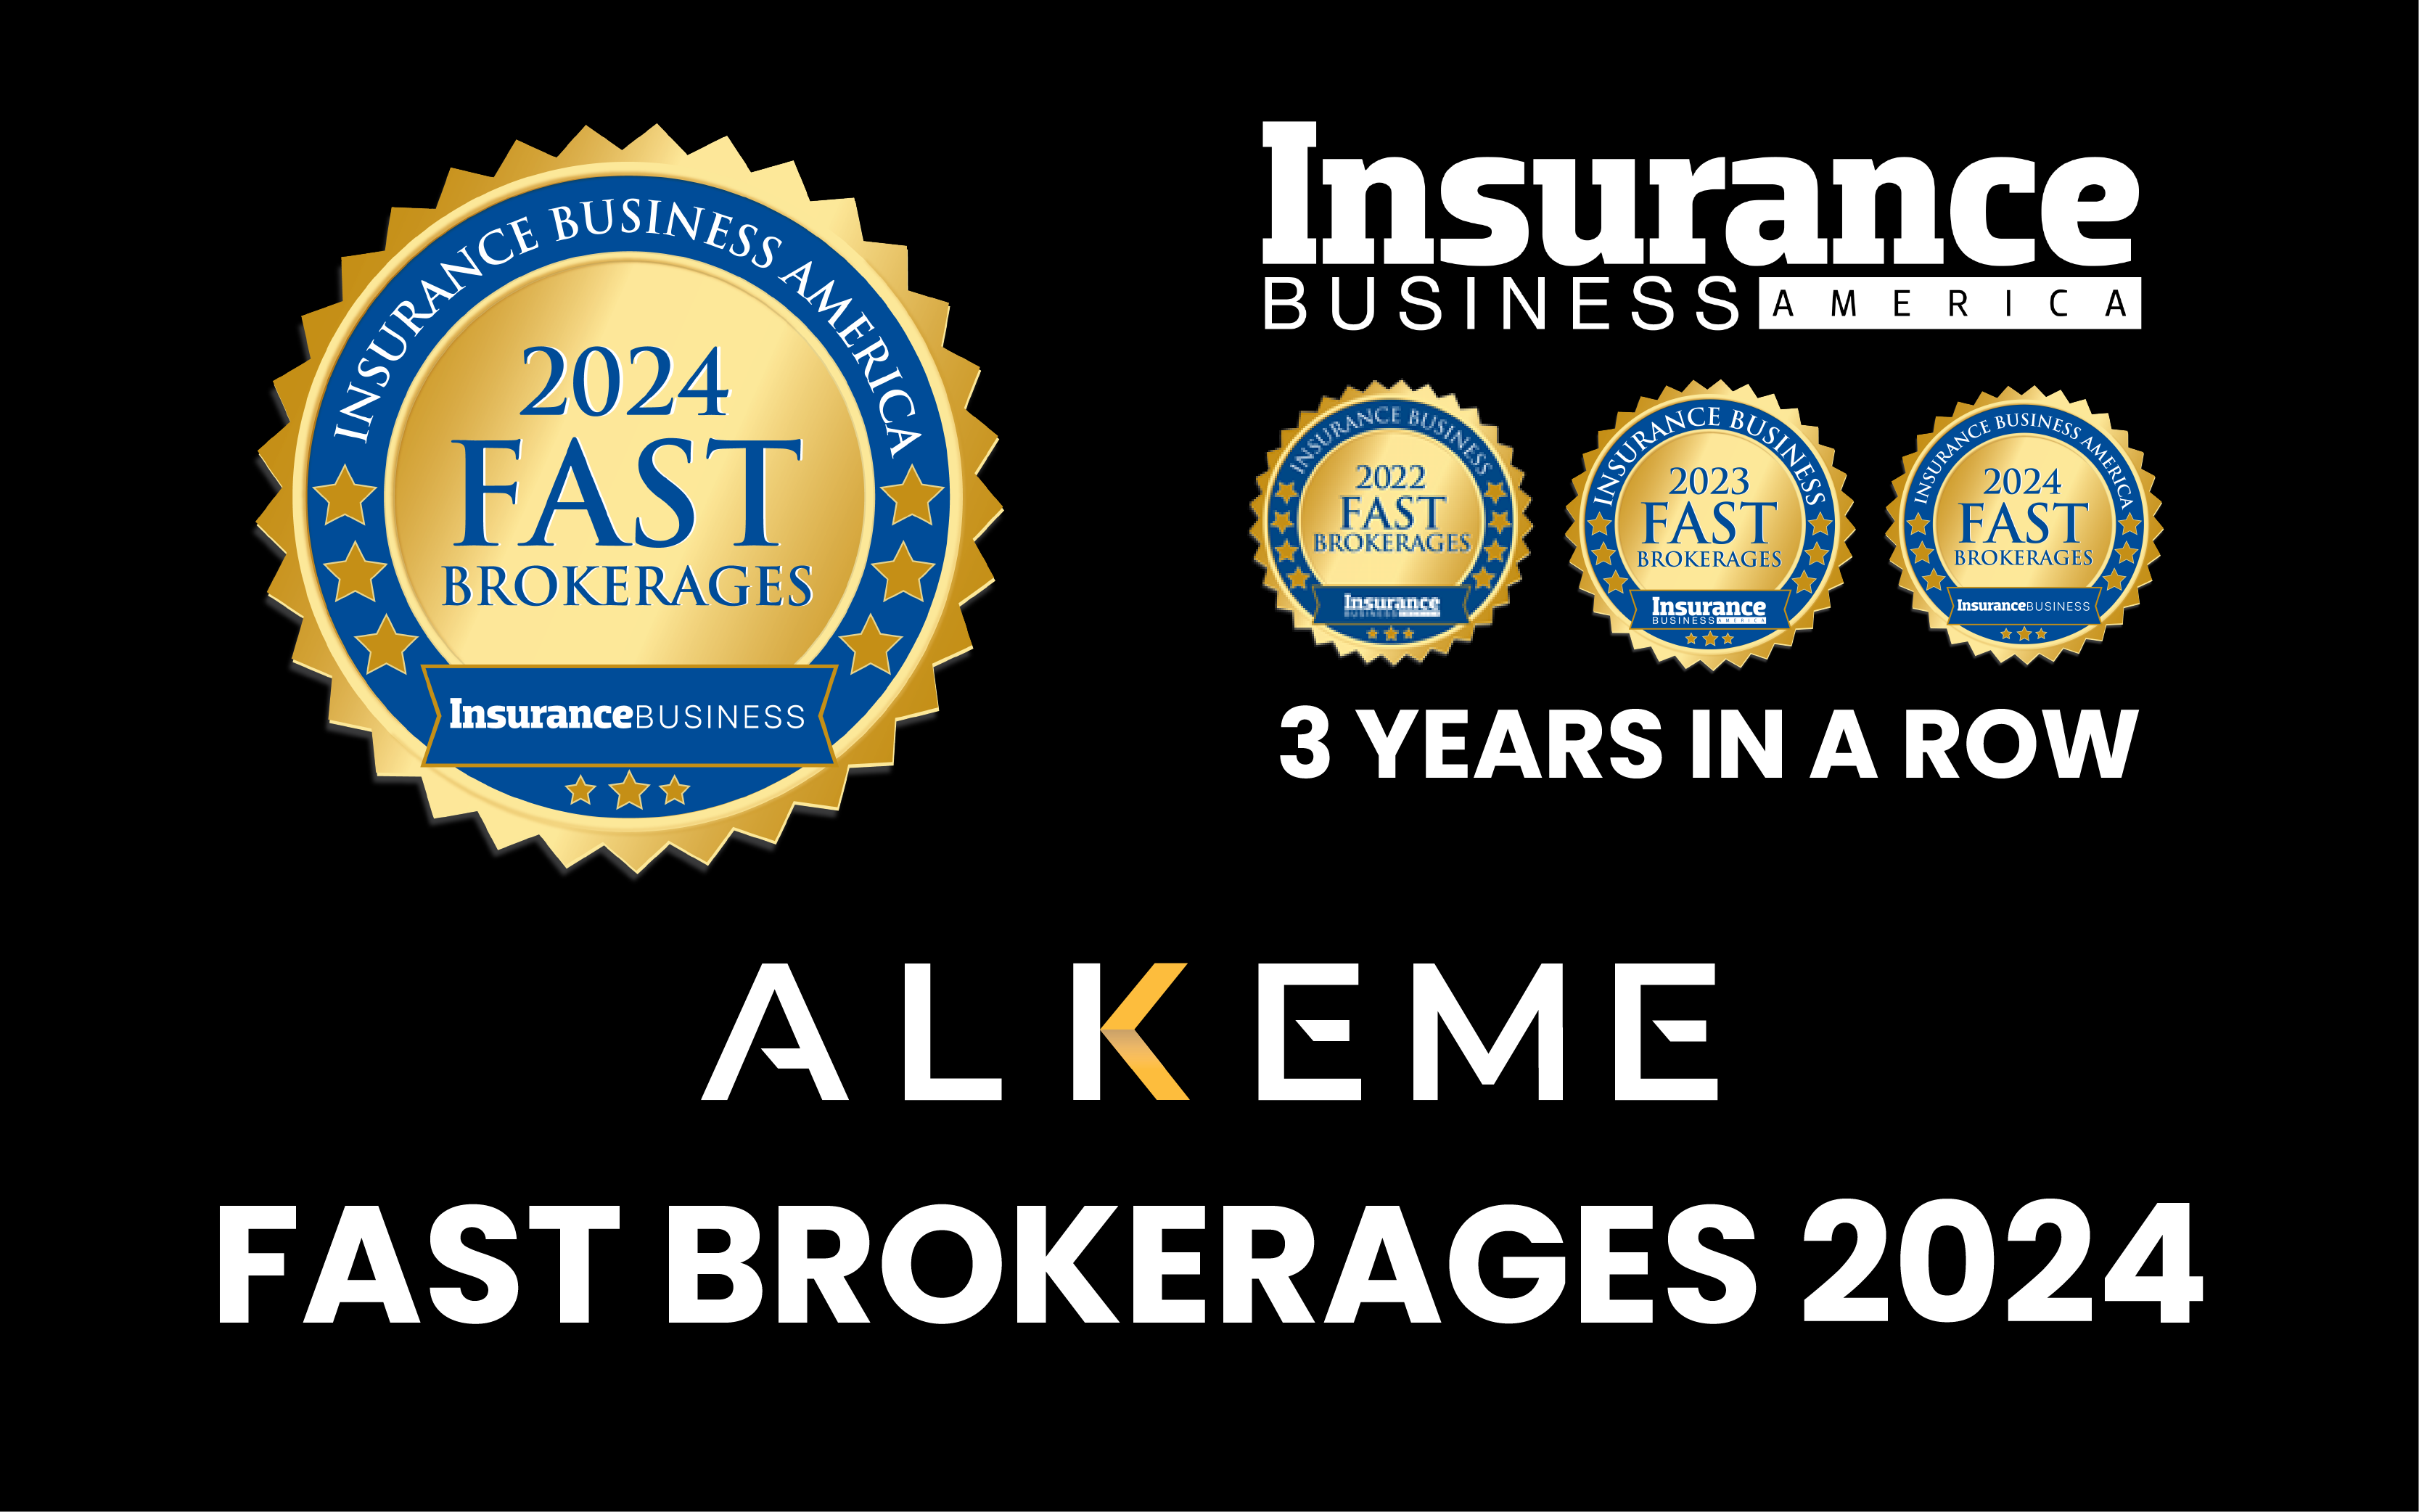 ALKEME Insurance earns the 2024 Fast Brokerages award from Insurance Business America